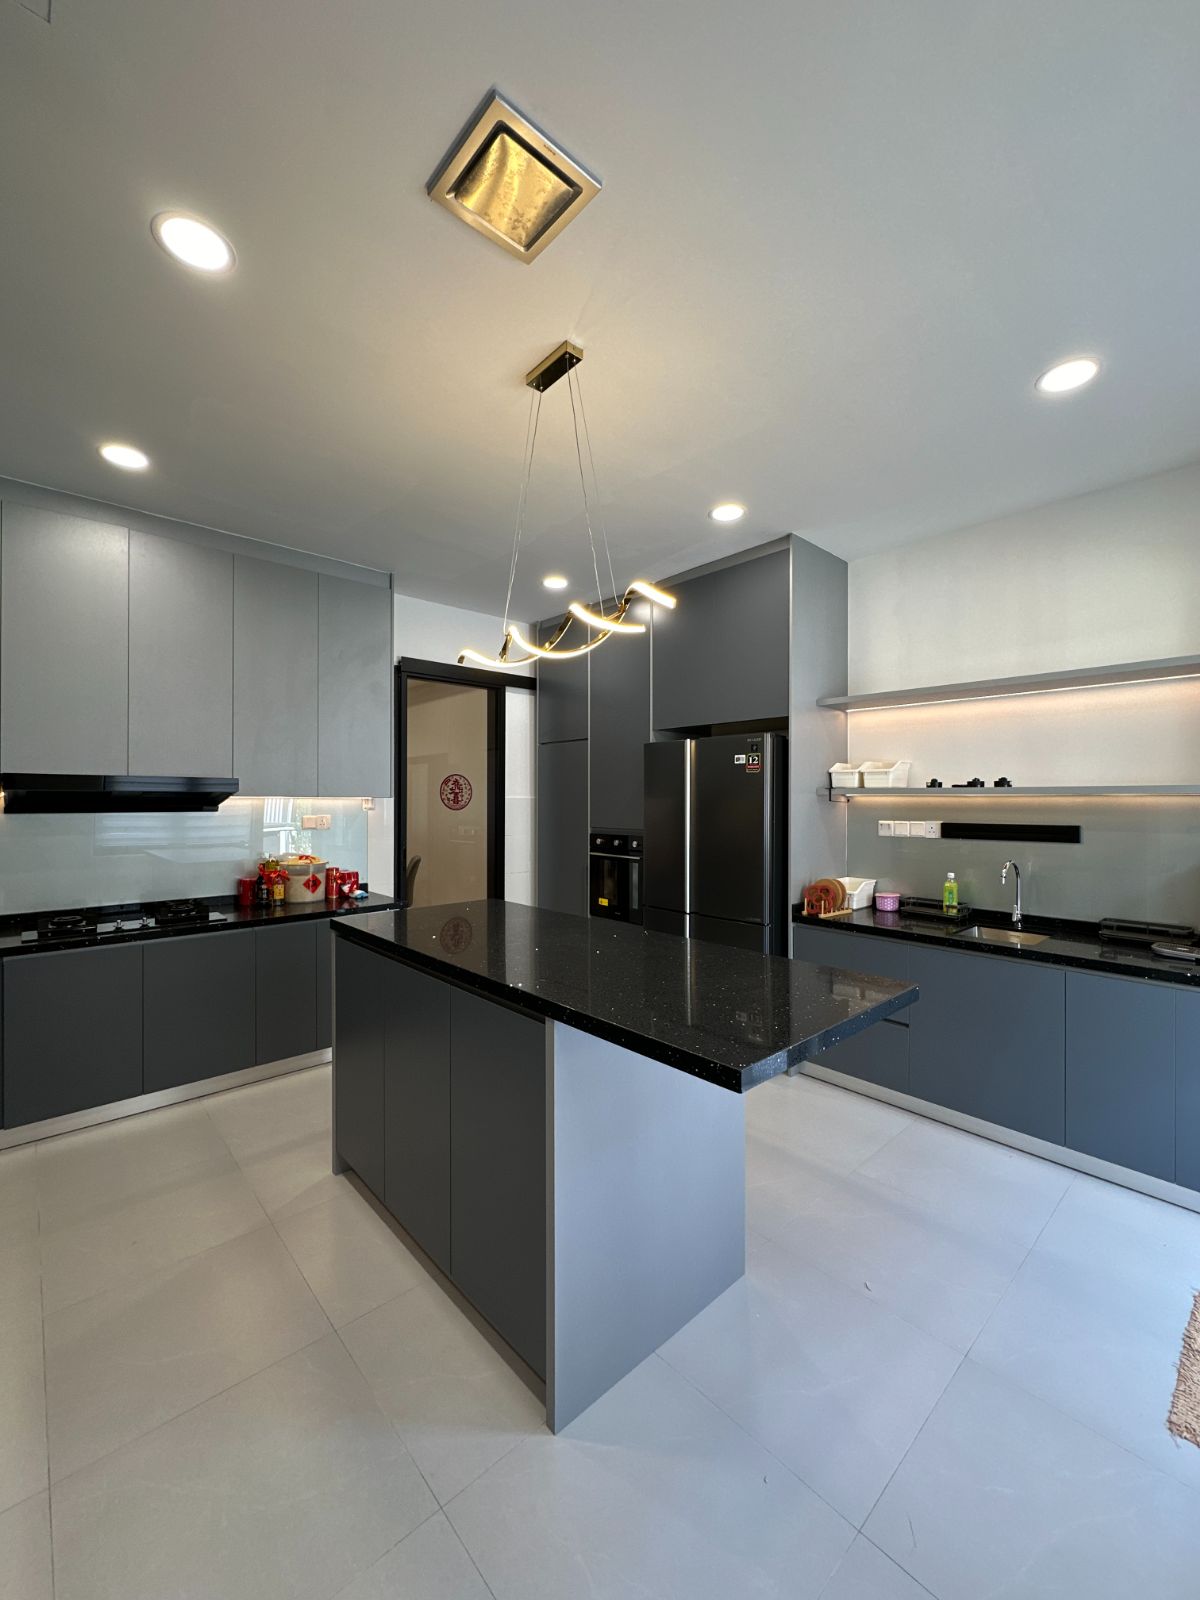 How to Choose Between Aluminum and Melamine Kitchen Cabinets